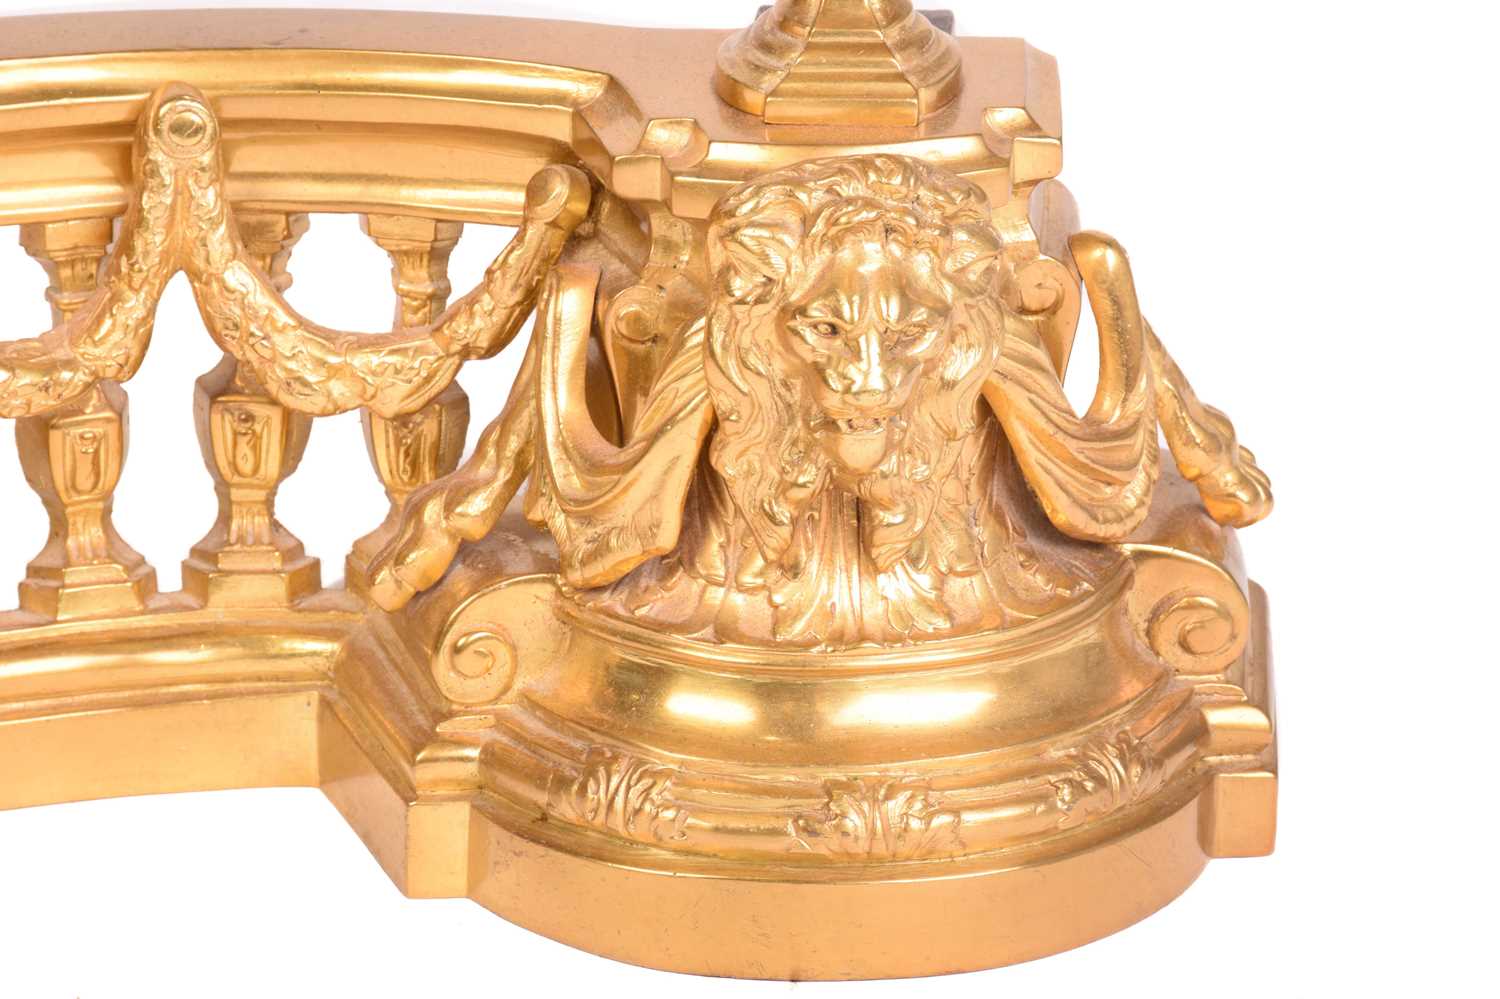 A pair of French empire-style gilt bronze chenet and valence each end with flaming urns draped - Image 4 of 7